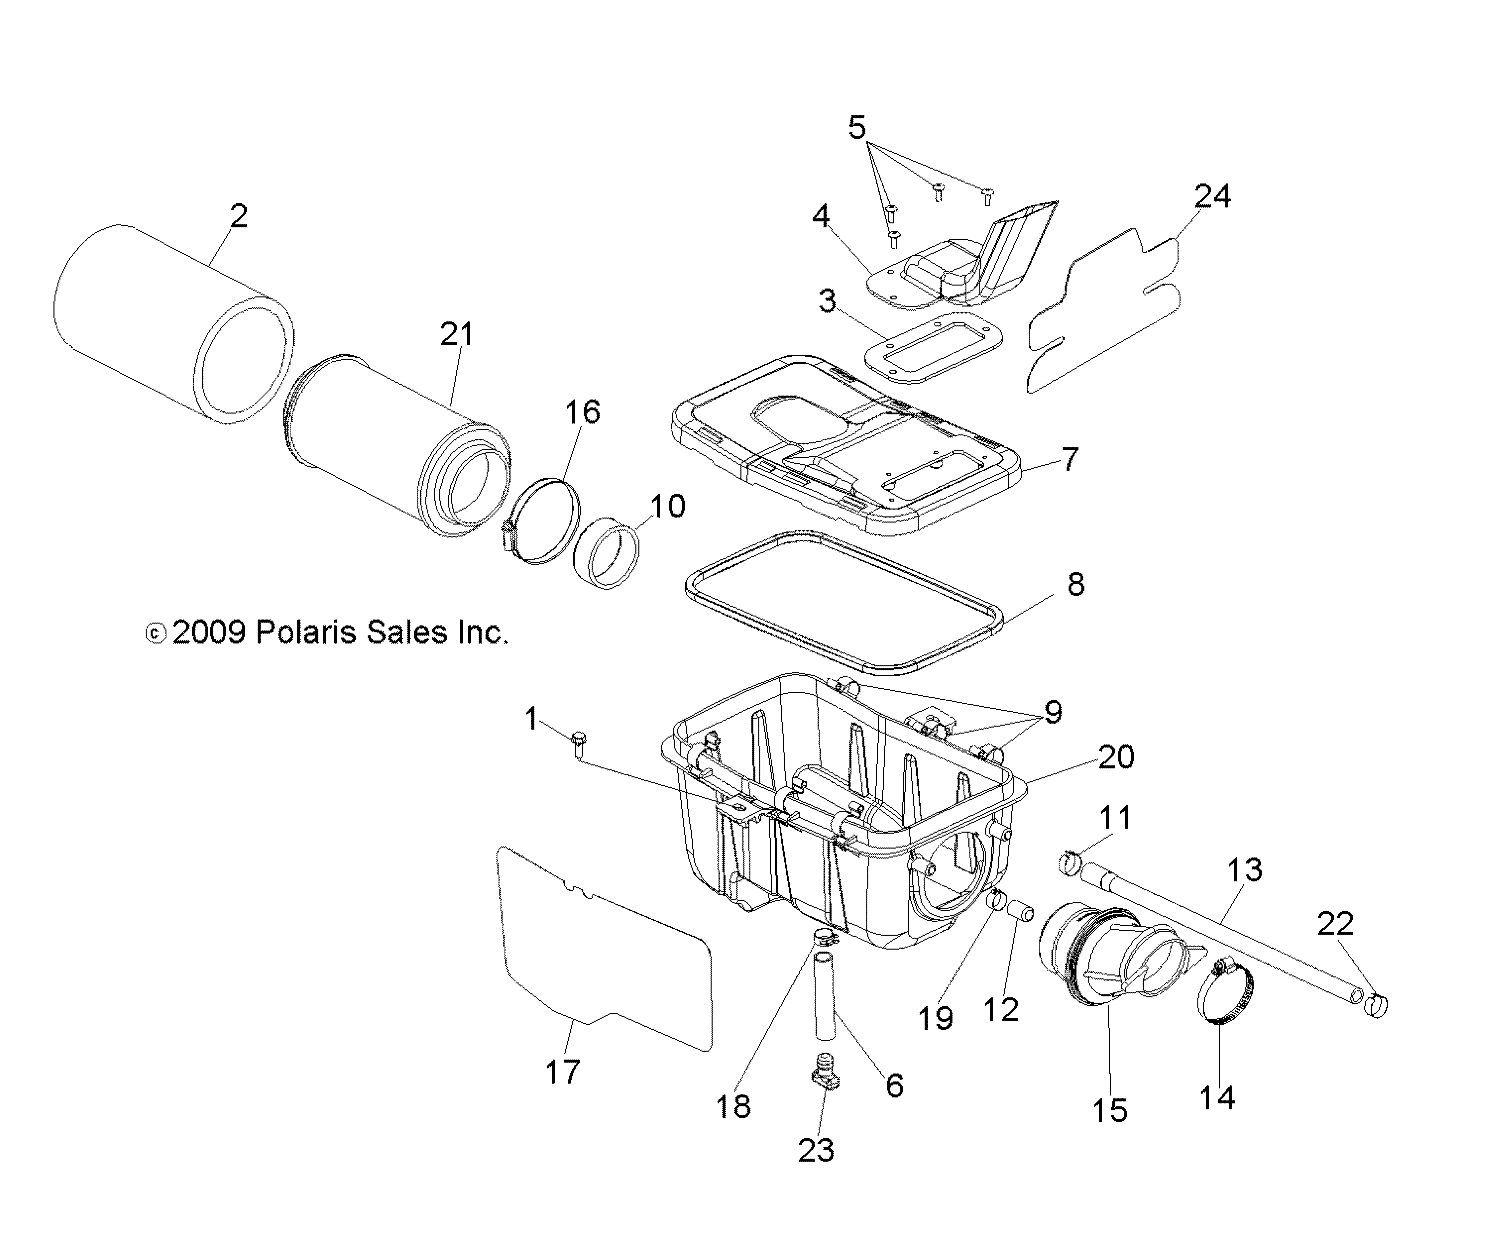 Part Number : 5438095 DUCT-INLET AIRBOX COVER